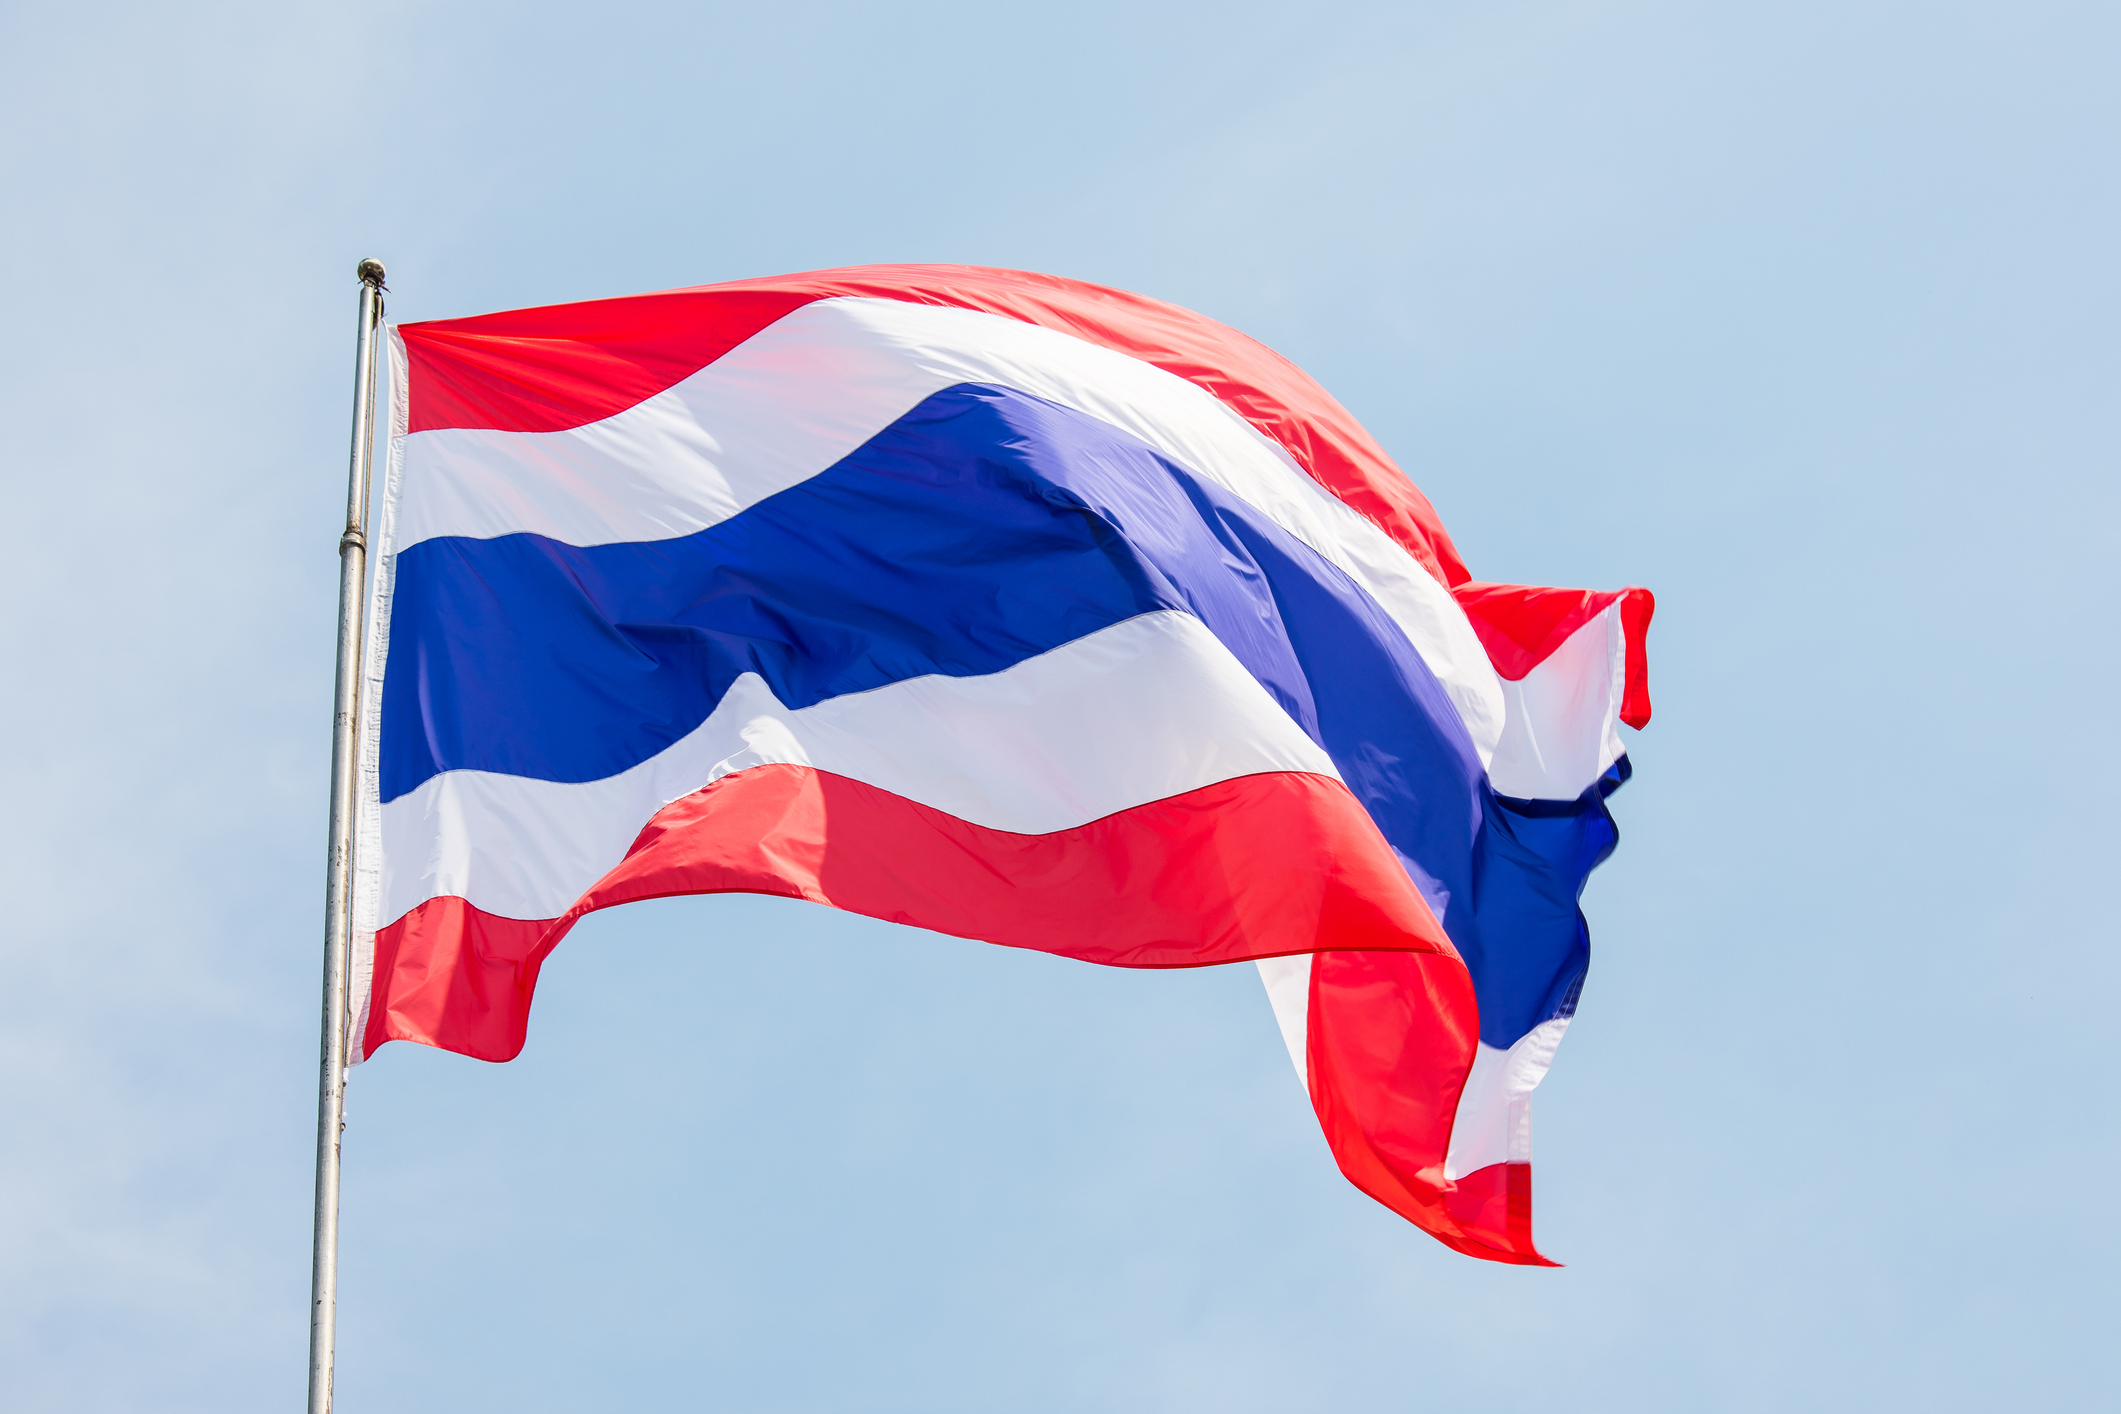 Thailand: Draft NGO law could be used to suppress civil society